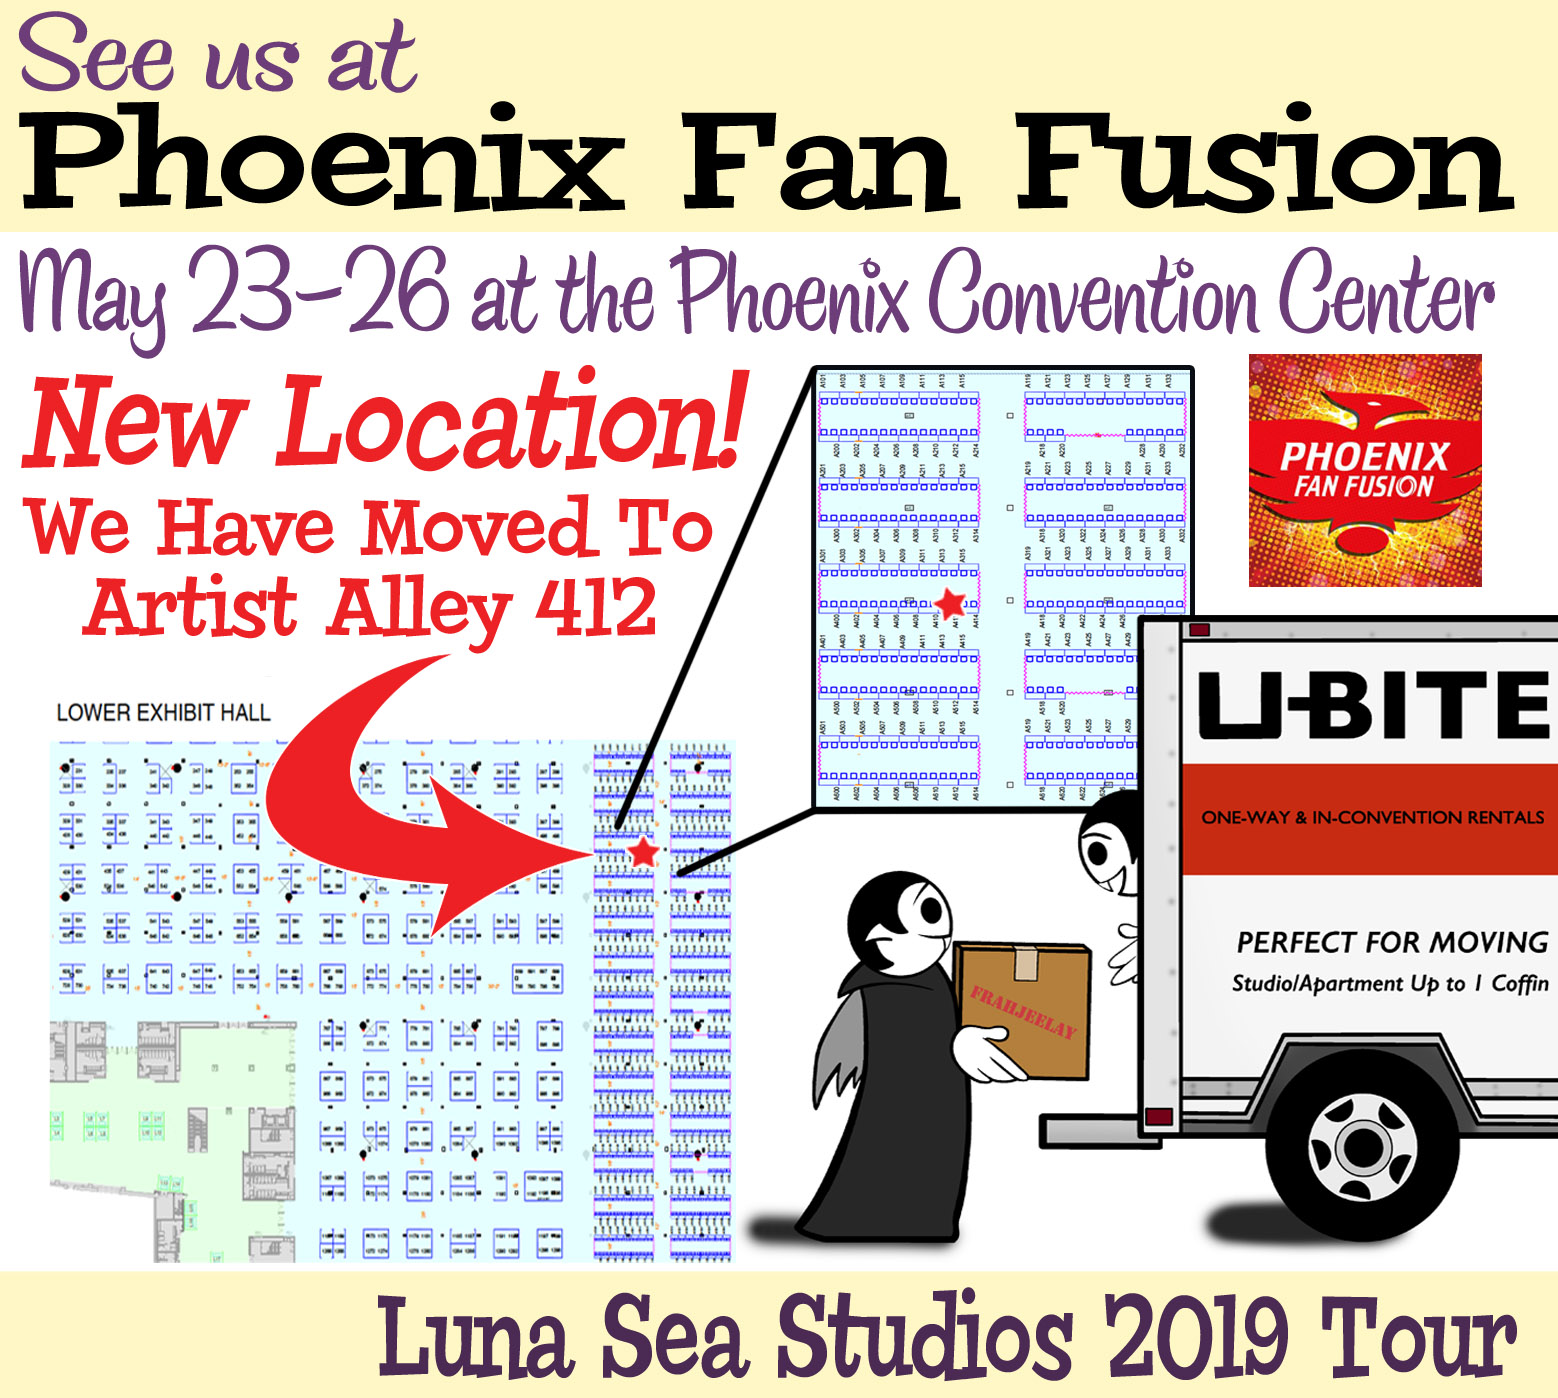 Phoenix Fan Fusion 2019 exhibitor floor map with the Little Vampires booth highlighted